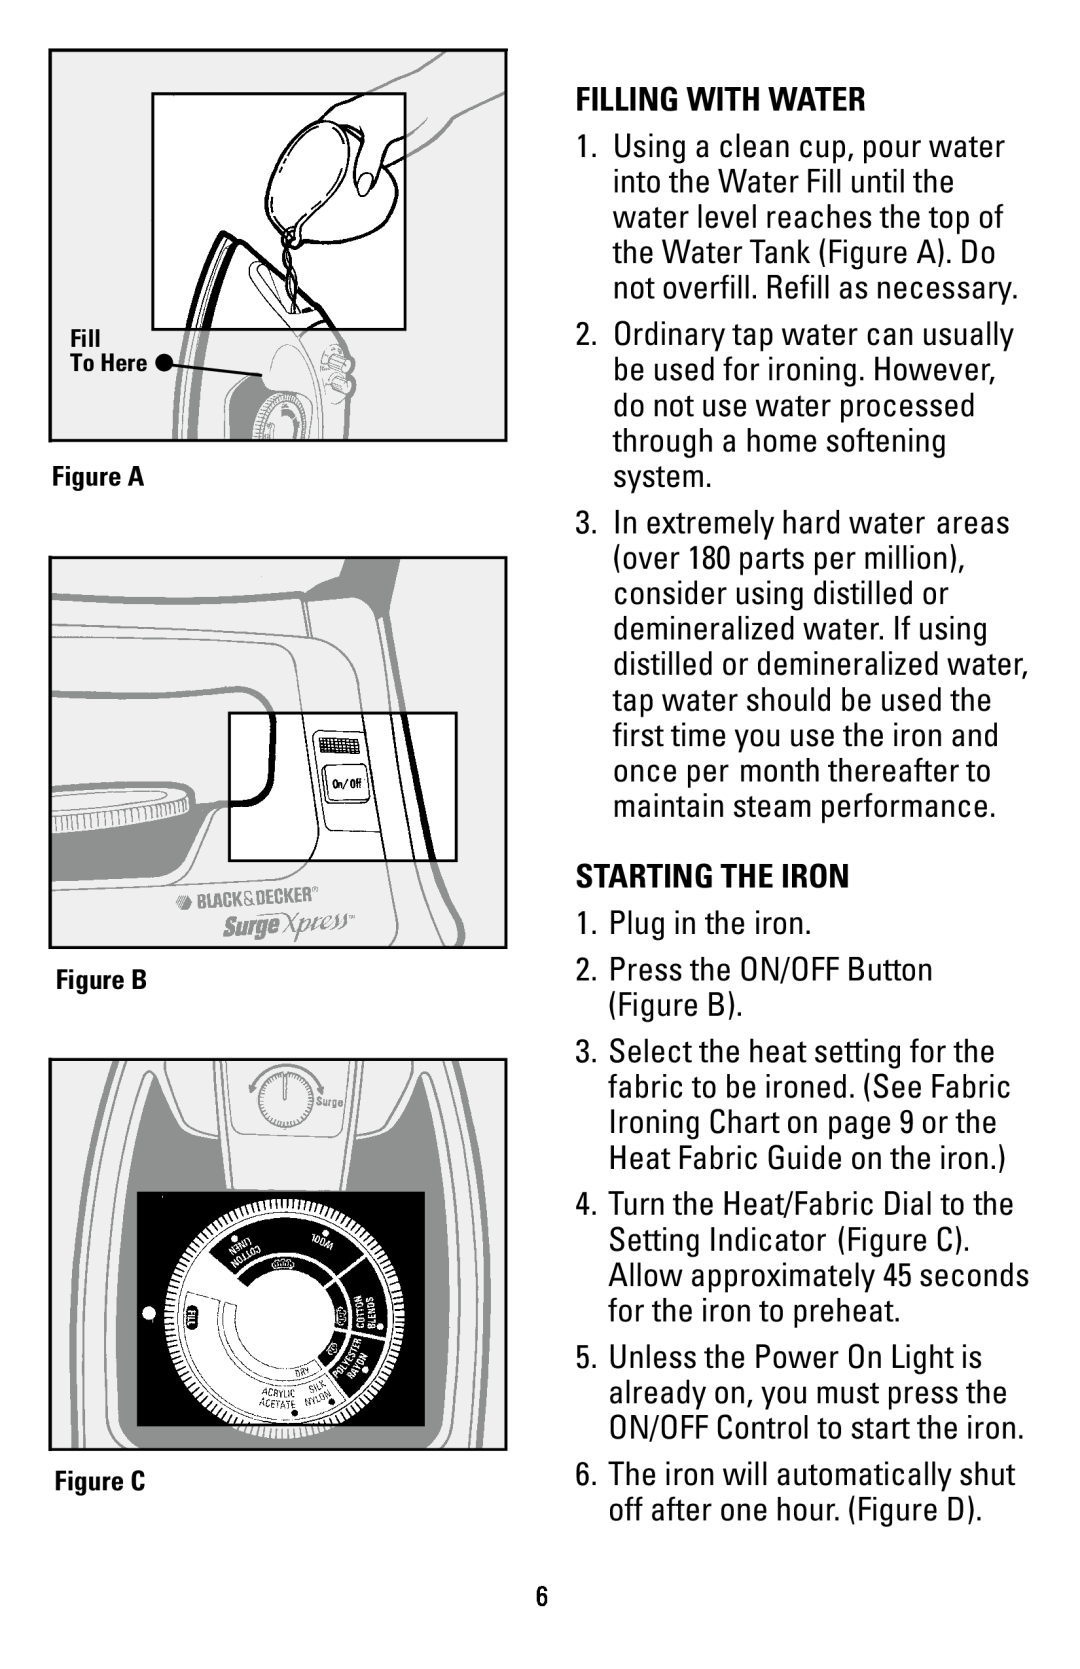 Black & Decker F855S manual Filling With Water, Starting The Iron, Plug in the iron 2. Press the ON/OFF Button Figure B 